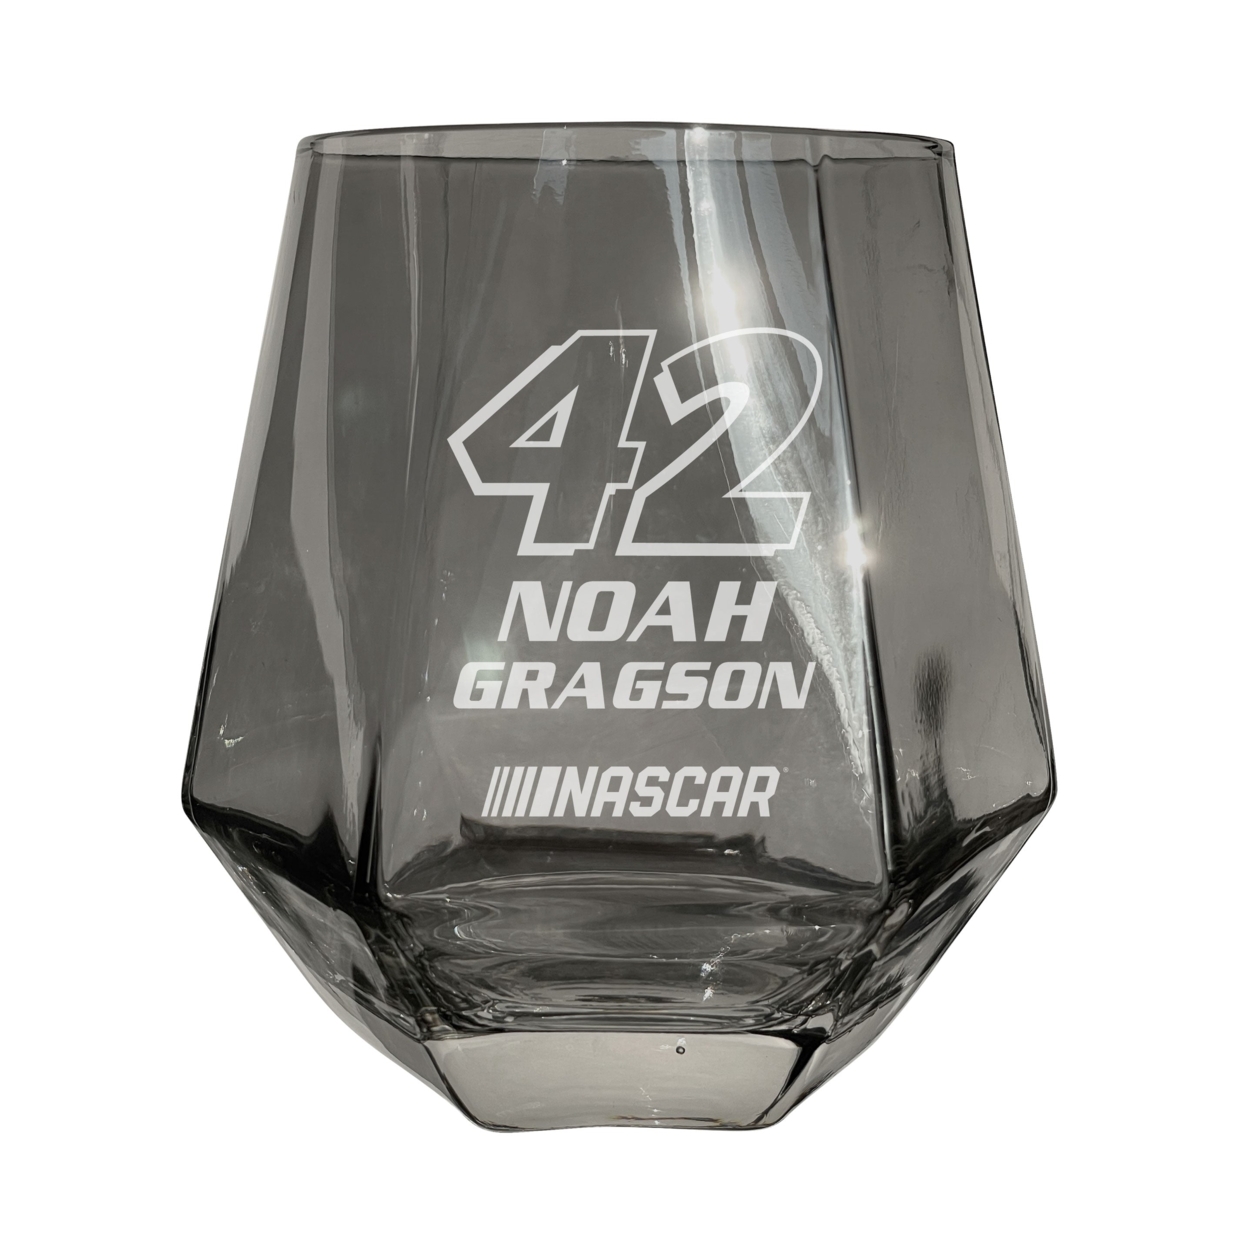 #42 Noah Gragson Officially Licensed 10 Oz Engraved Diamond Wine Glass - Clear, Single